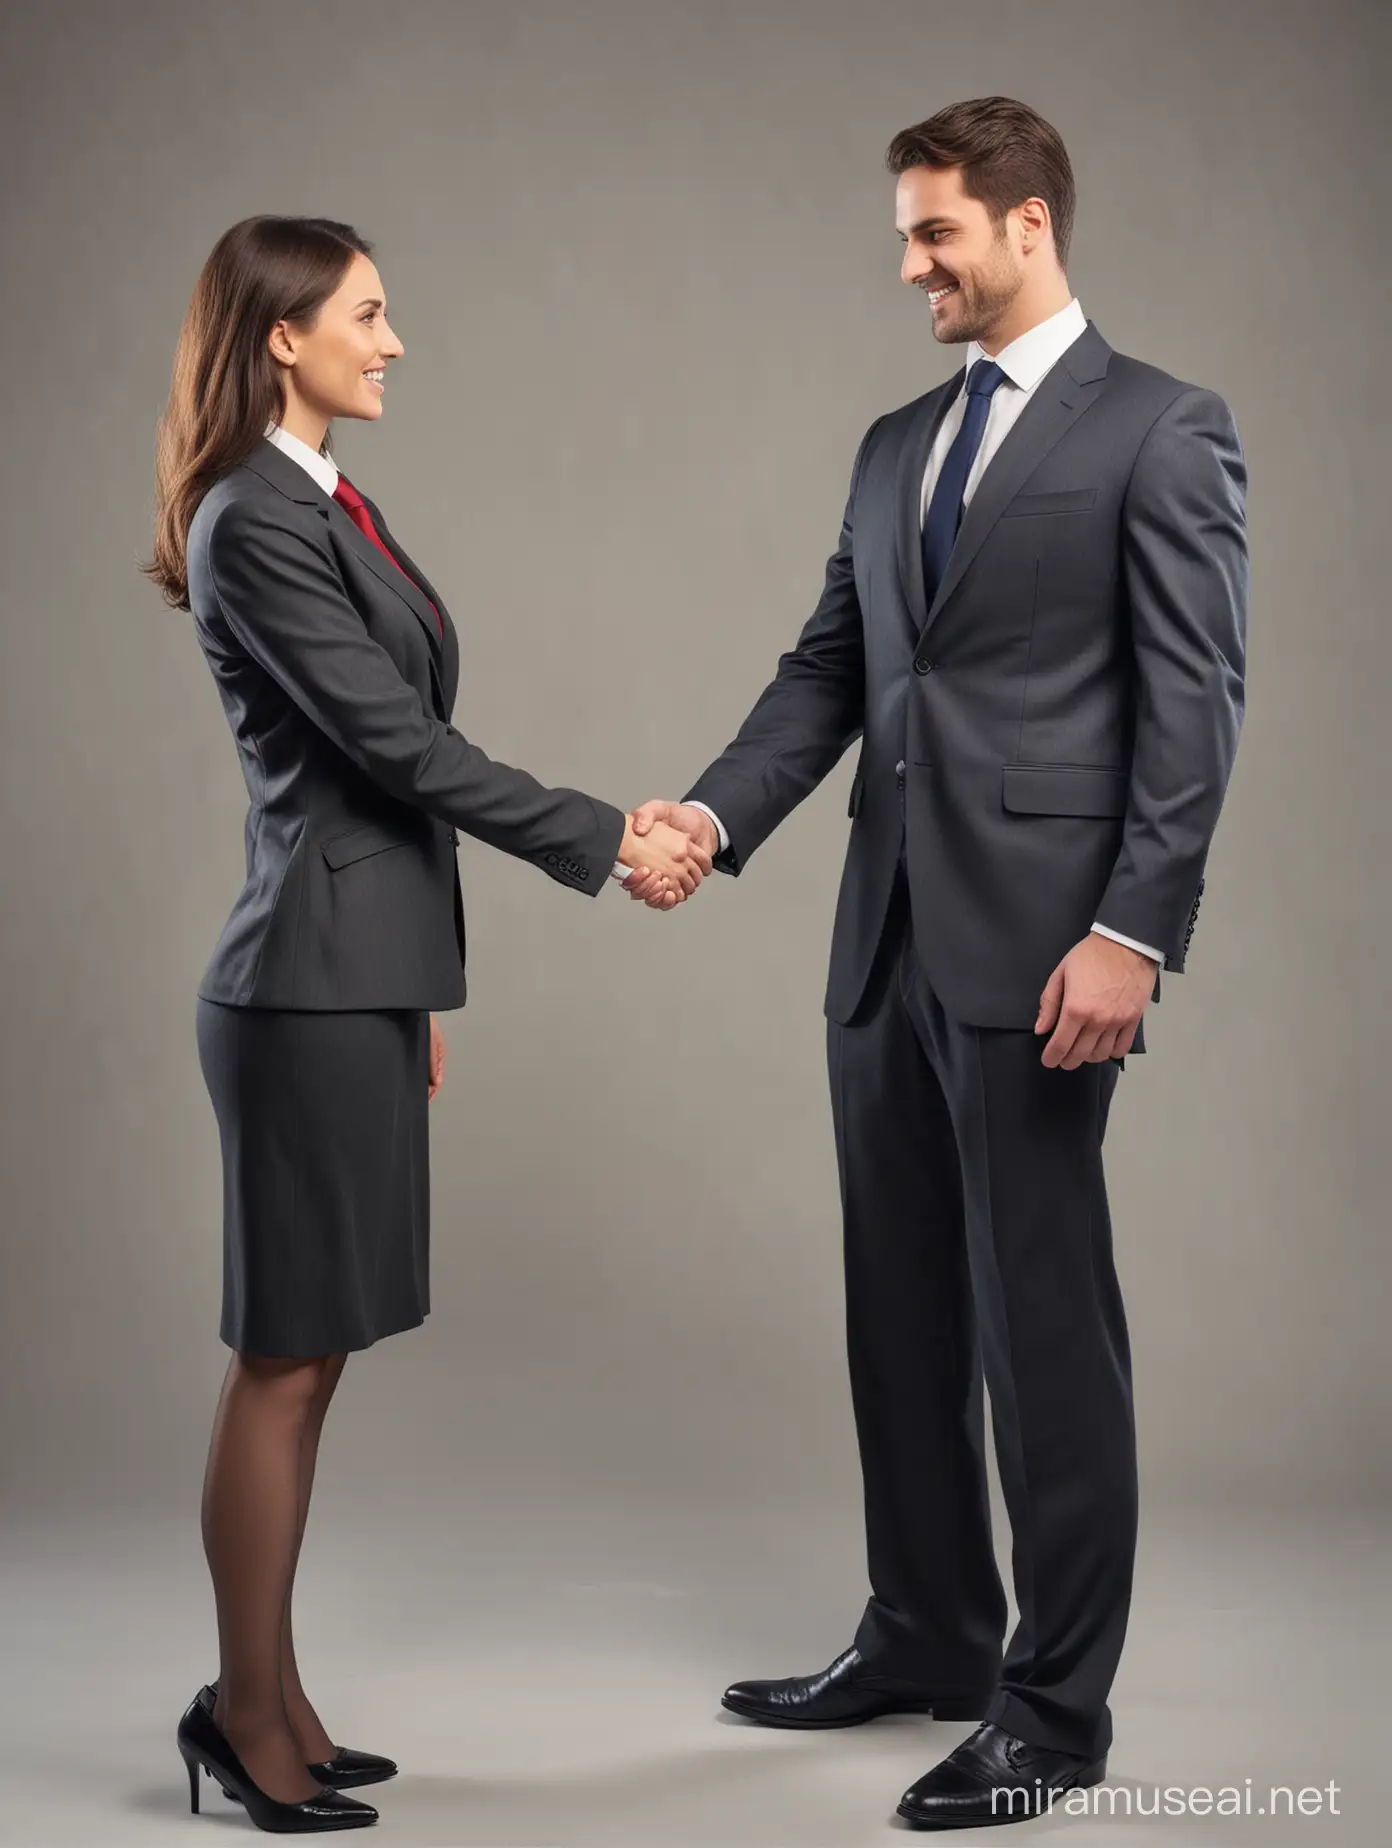 Professional Man and Woman Shaking Hands in Formal Attire